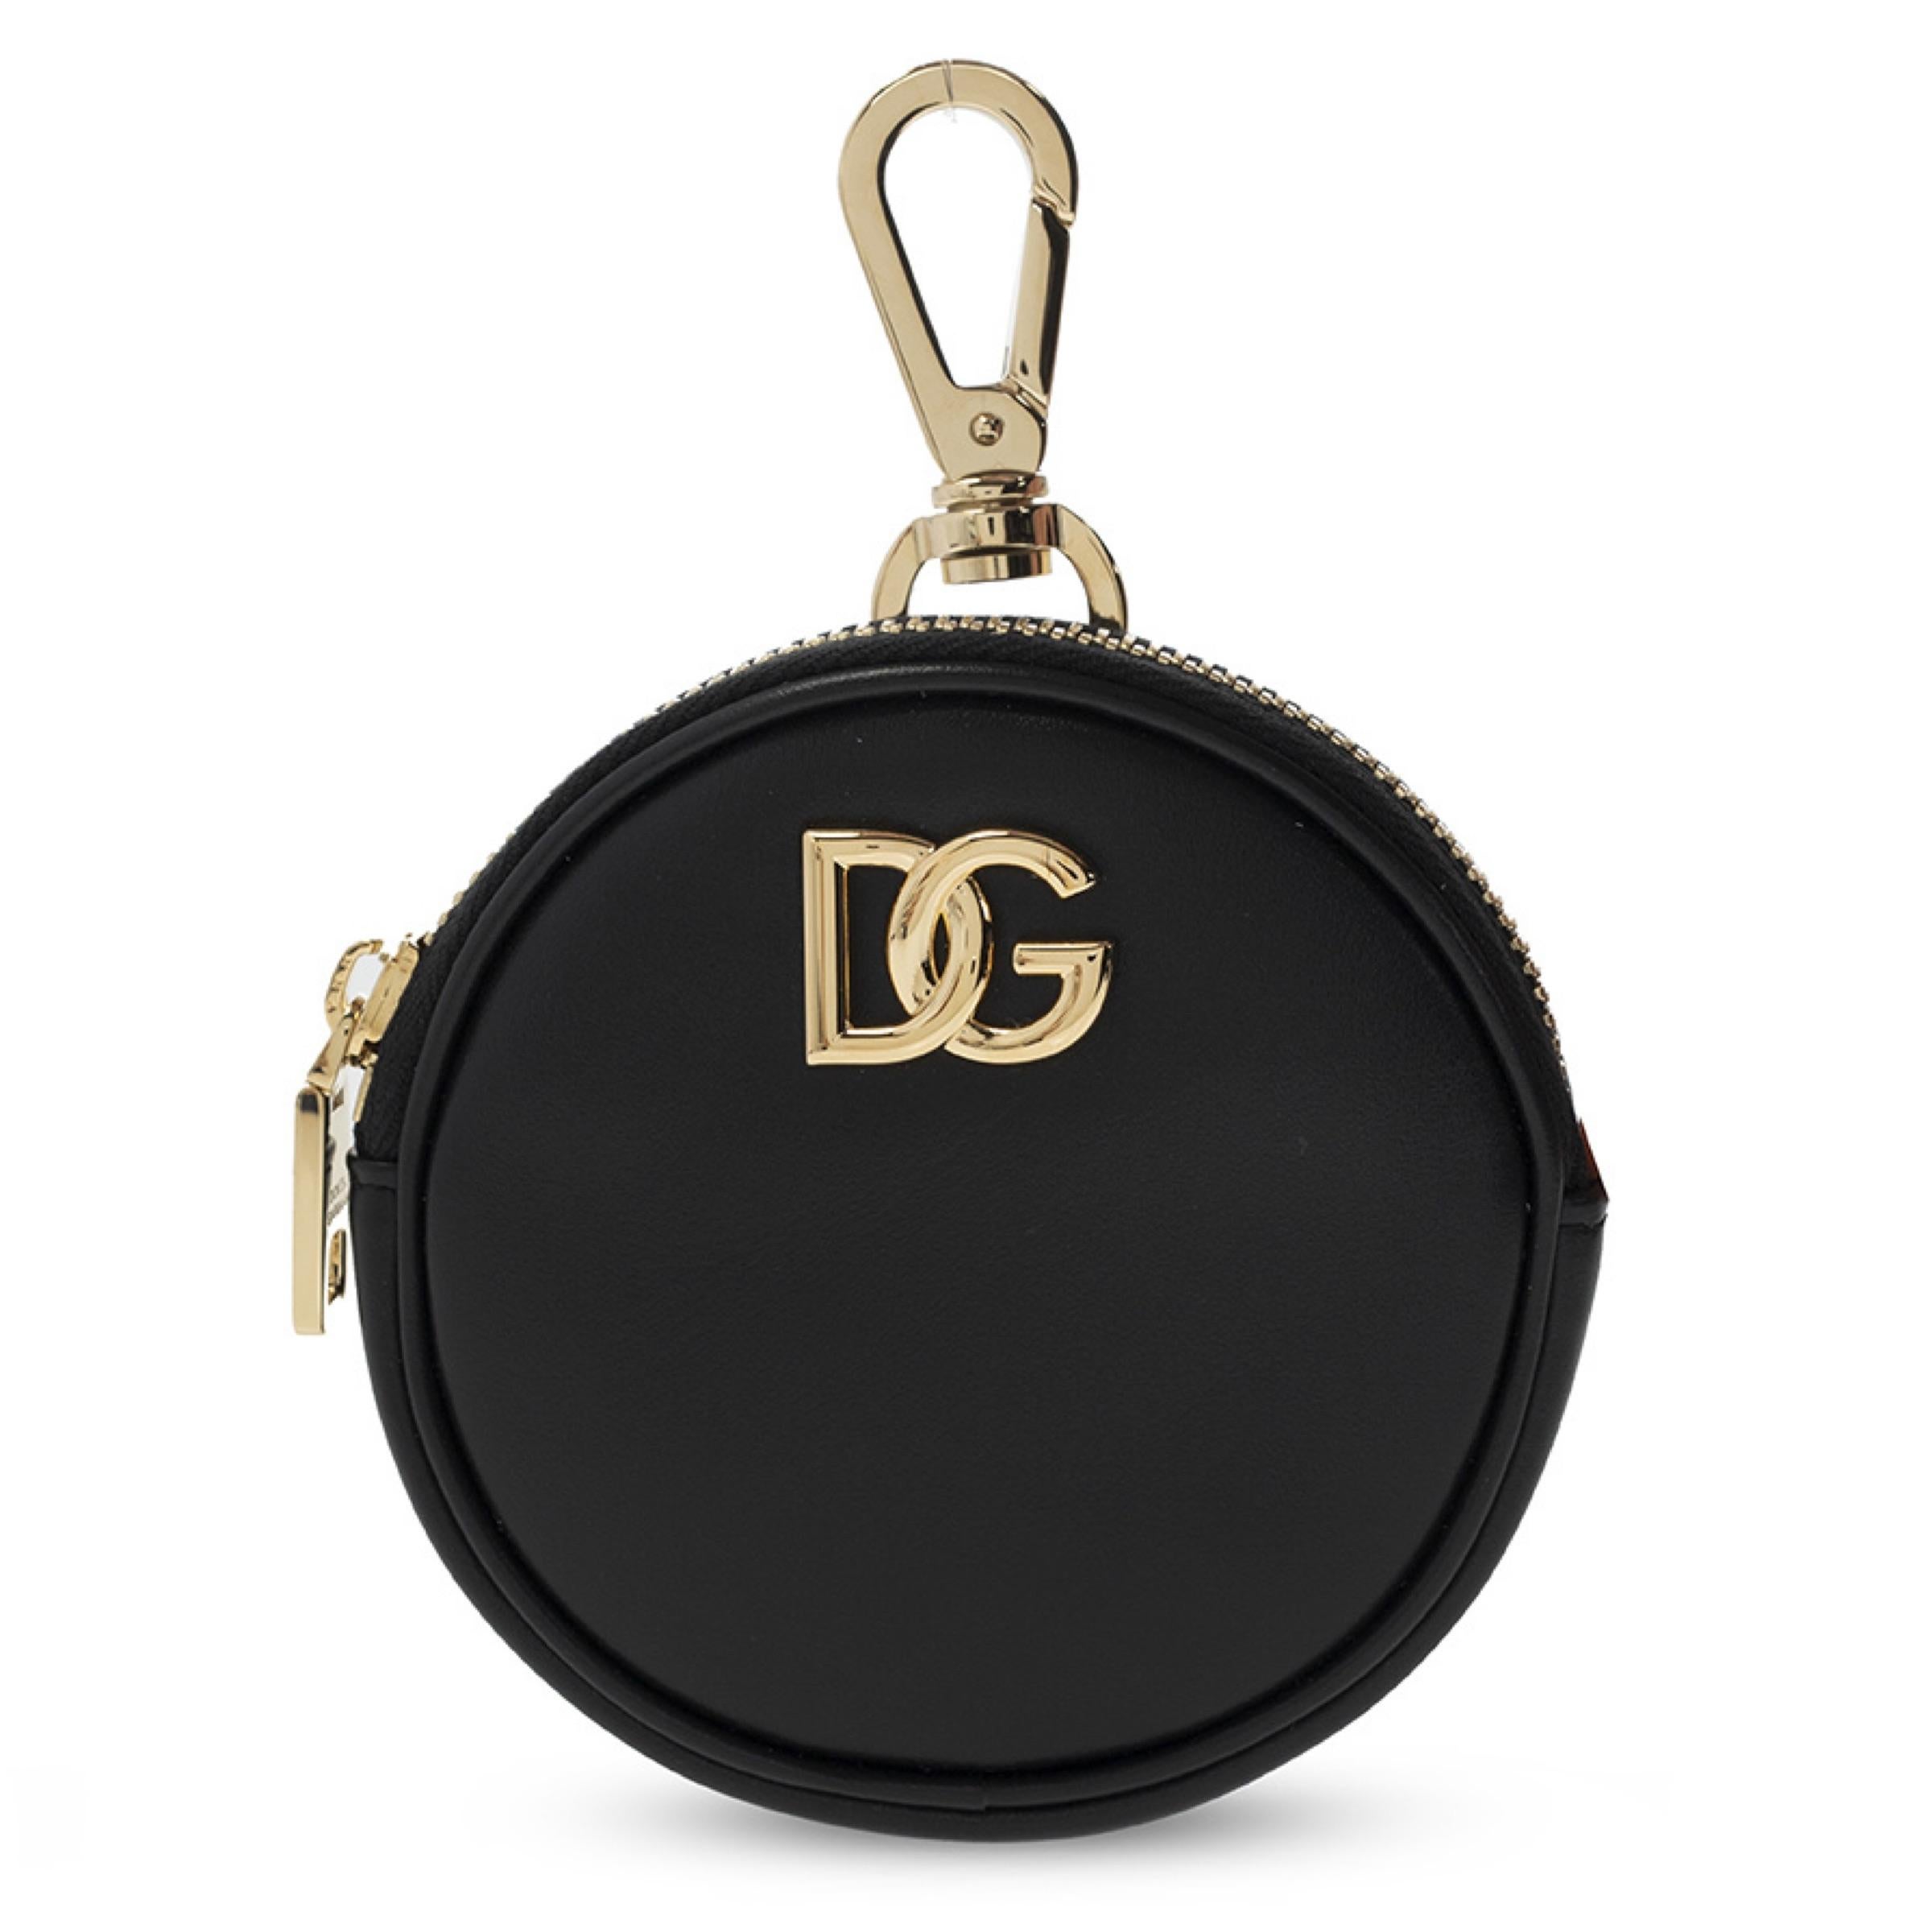 New Dolce & Gabbana Black Front Logo Leather Round Coin Pouch

Authenticity Guaranteed

DETAILS
Brand: Dolce & Gabbana
Condition: Brand new
Gender: Unisex
Category: Pouch
Color: Black
Material: Leather
Front DG logo
Gold-tone hardware
Top zip